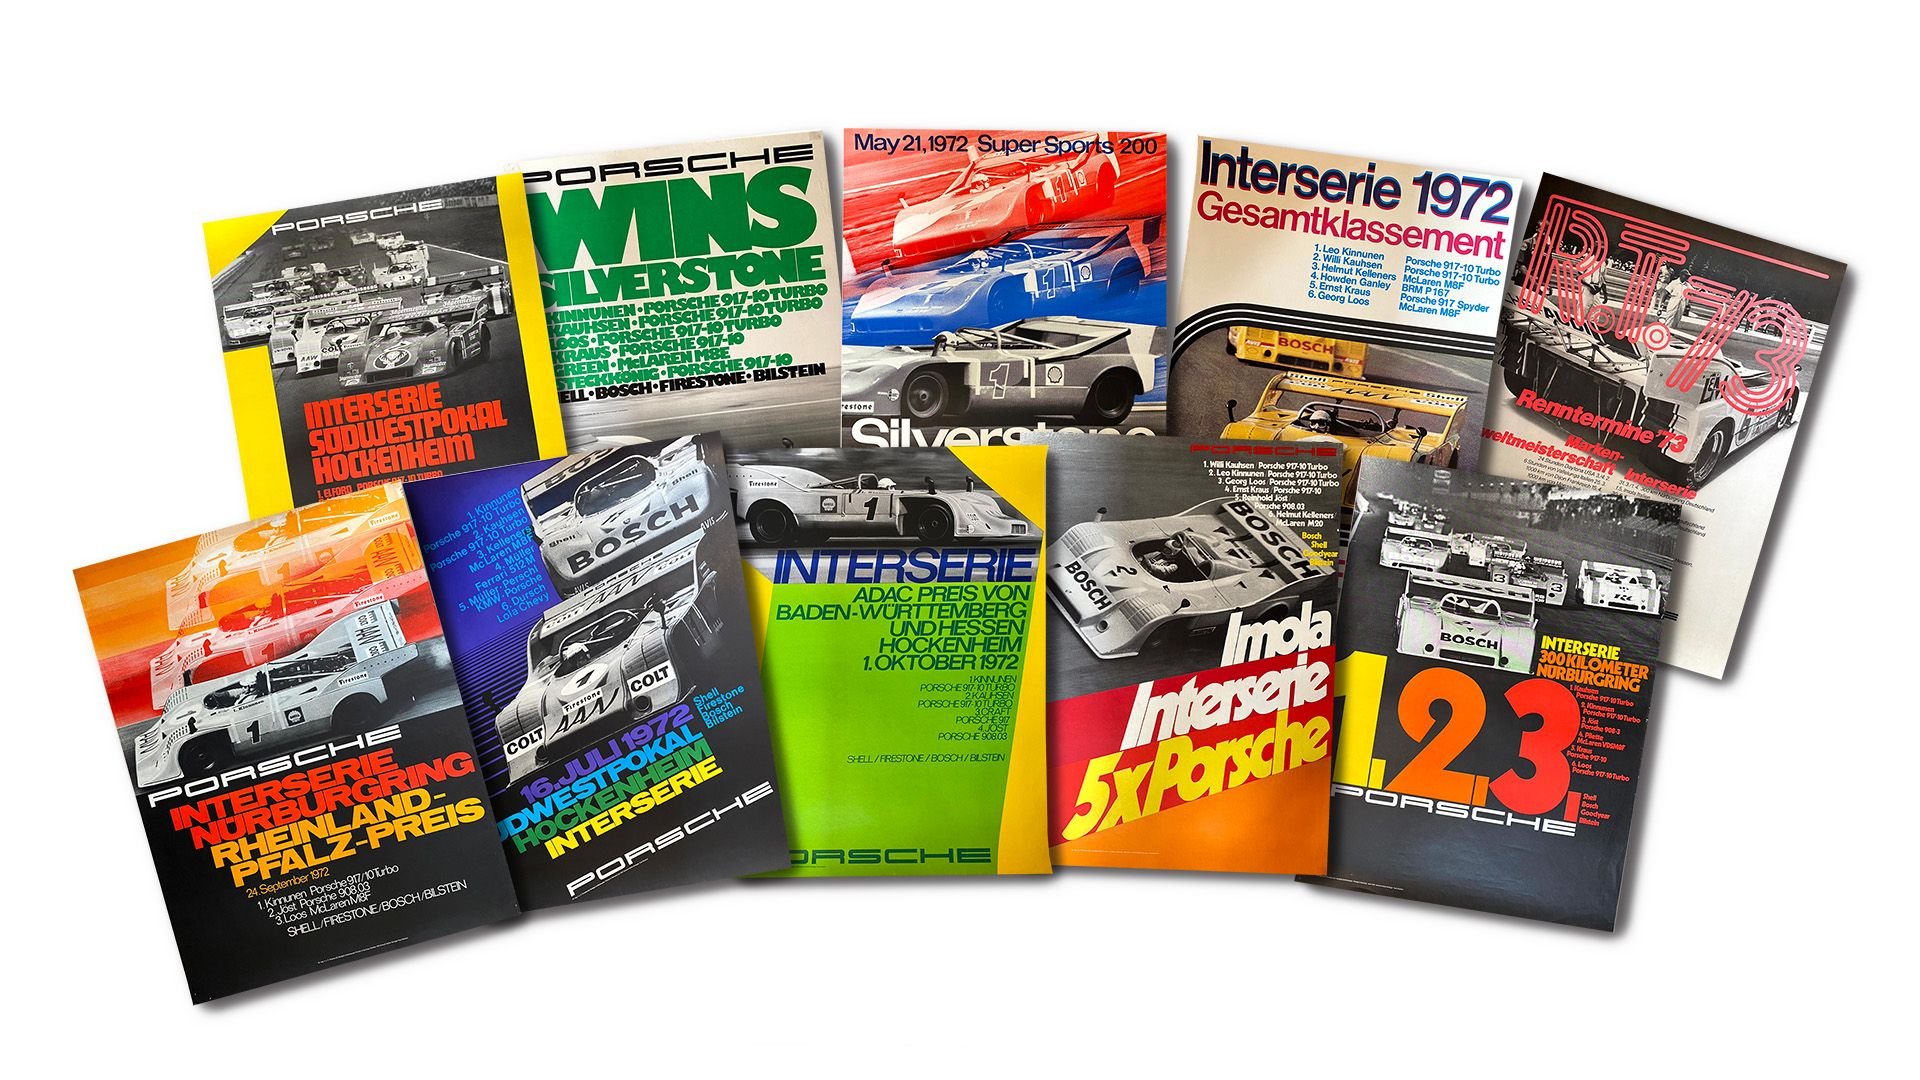 Broad Arrow Auctions | Group of 10 Porsche Interserie 917/10 Factory Racing Posters 1972-1973